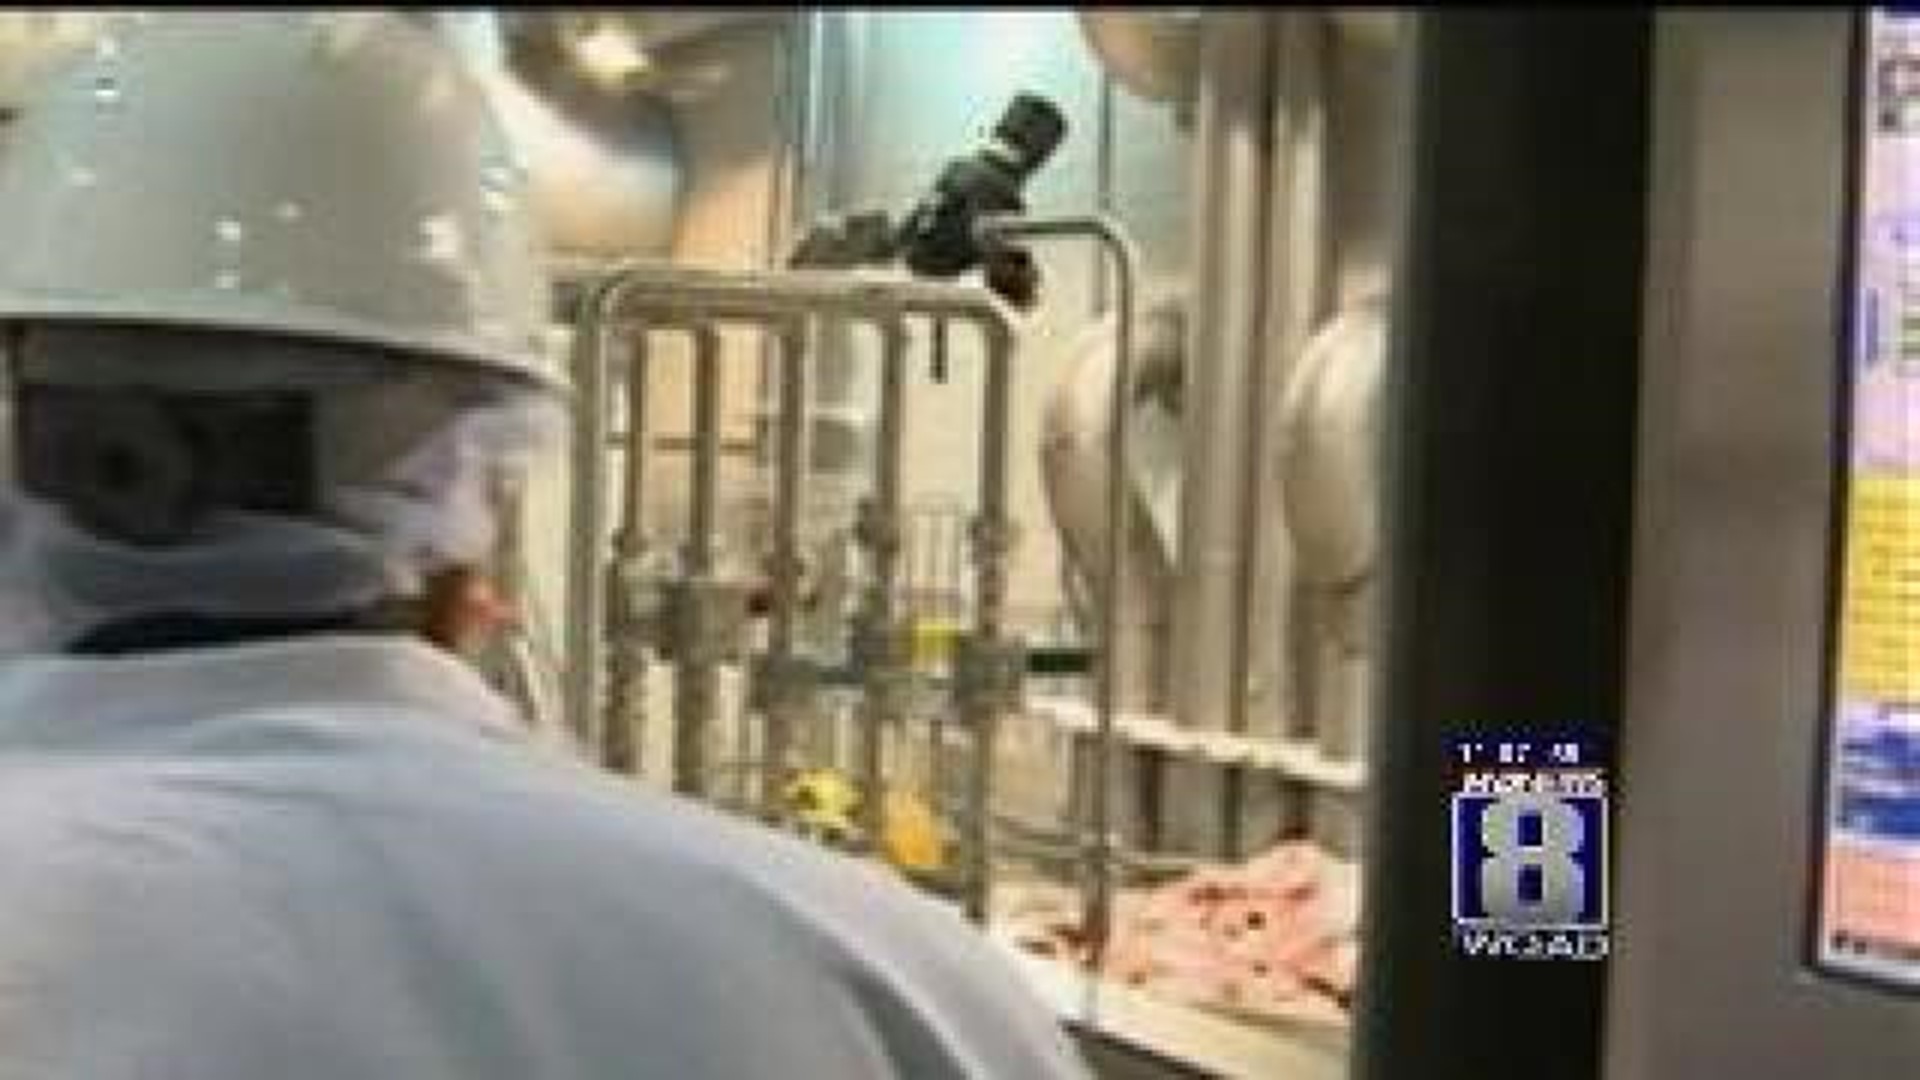 BPI employees laid off after pink slime controversy